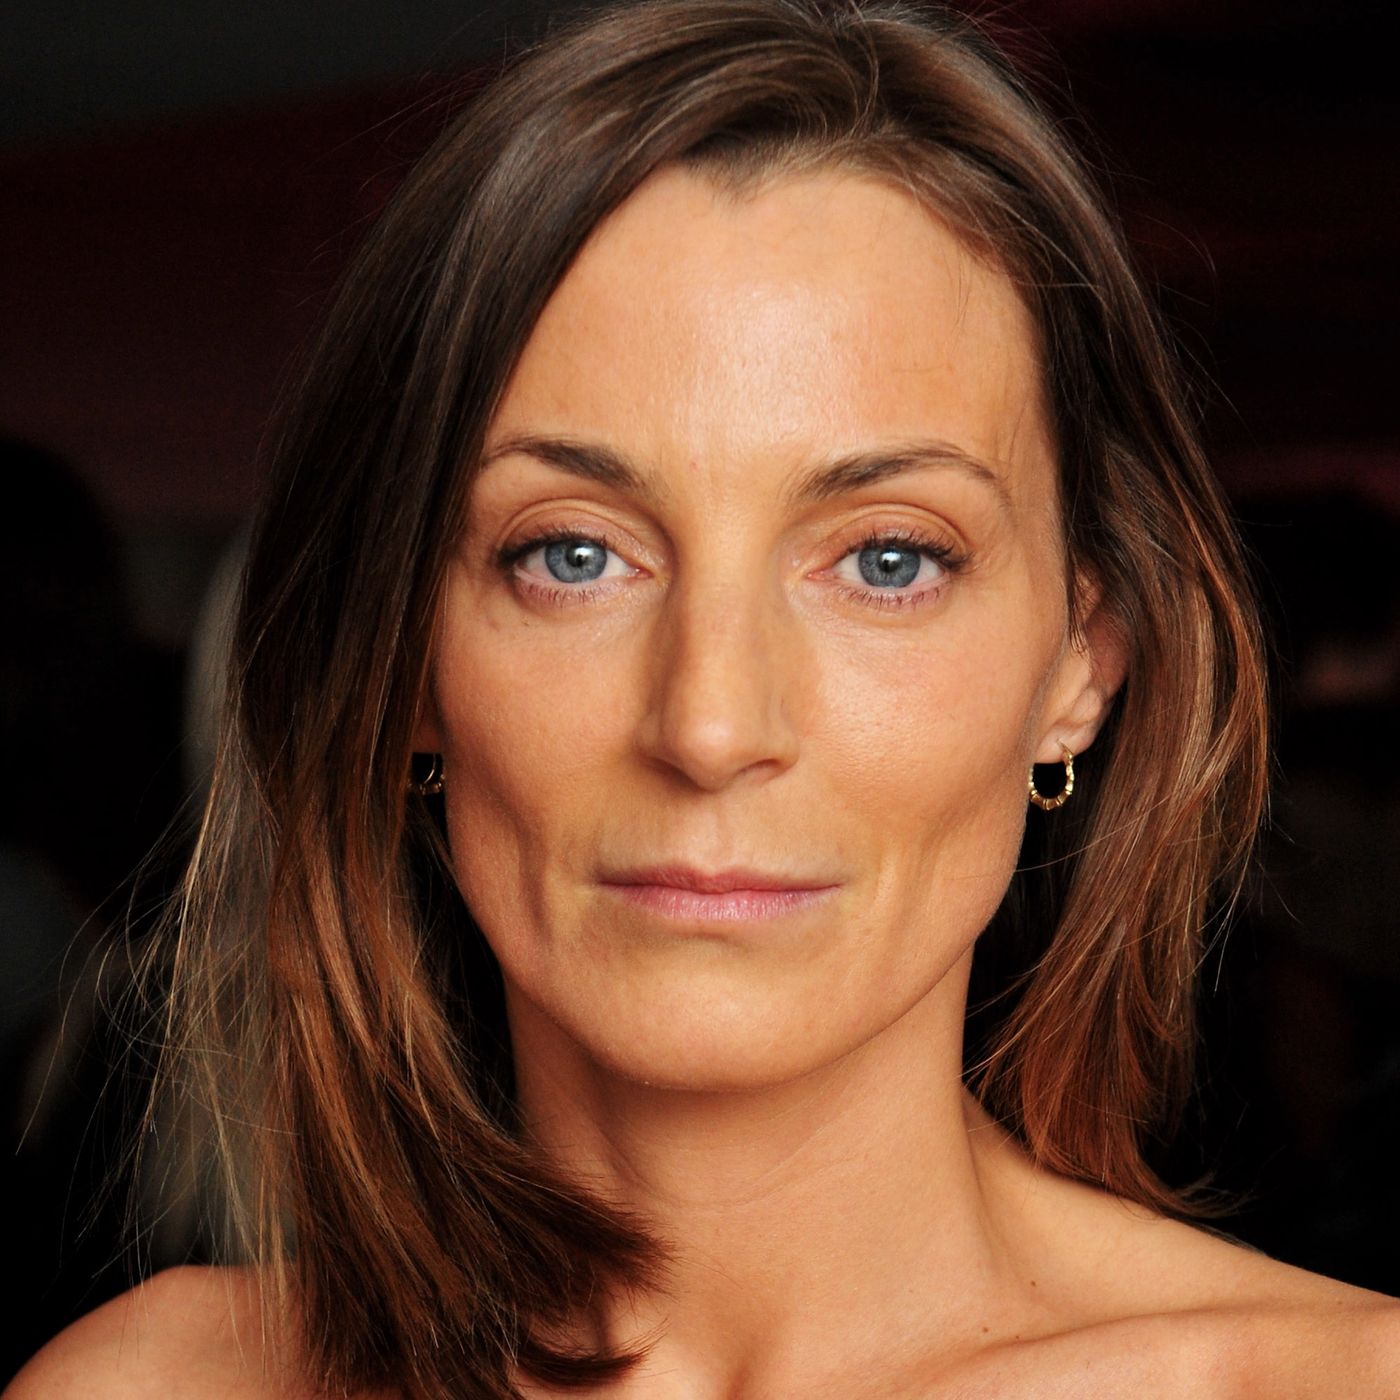 Fashion designer Phoebe Philo to launch own brand in September